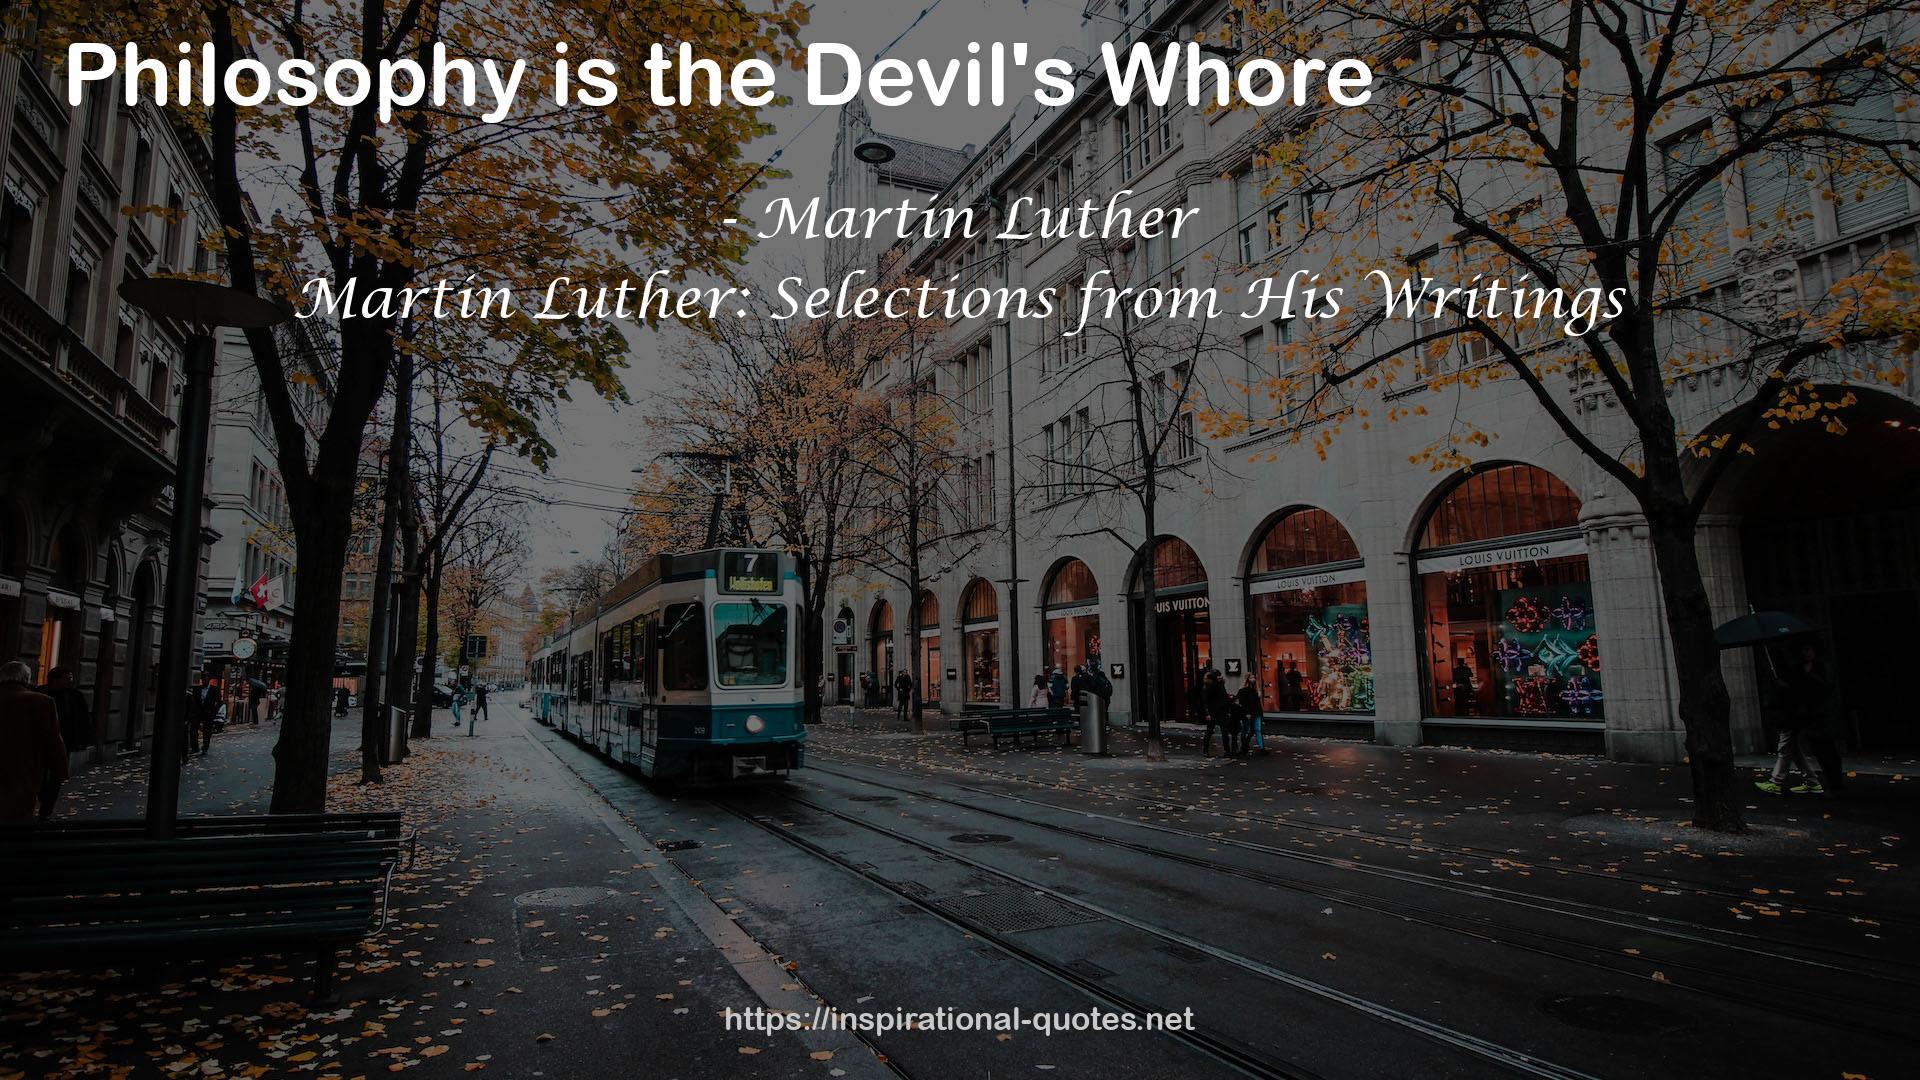 Martin Luther: Selections from His Writings QUOTES